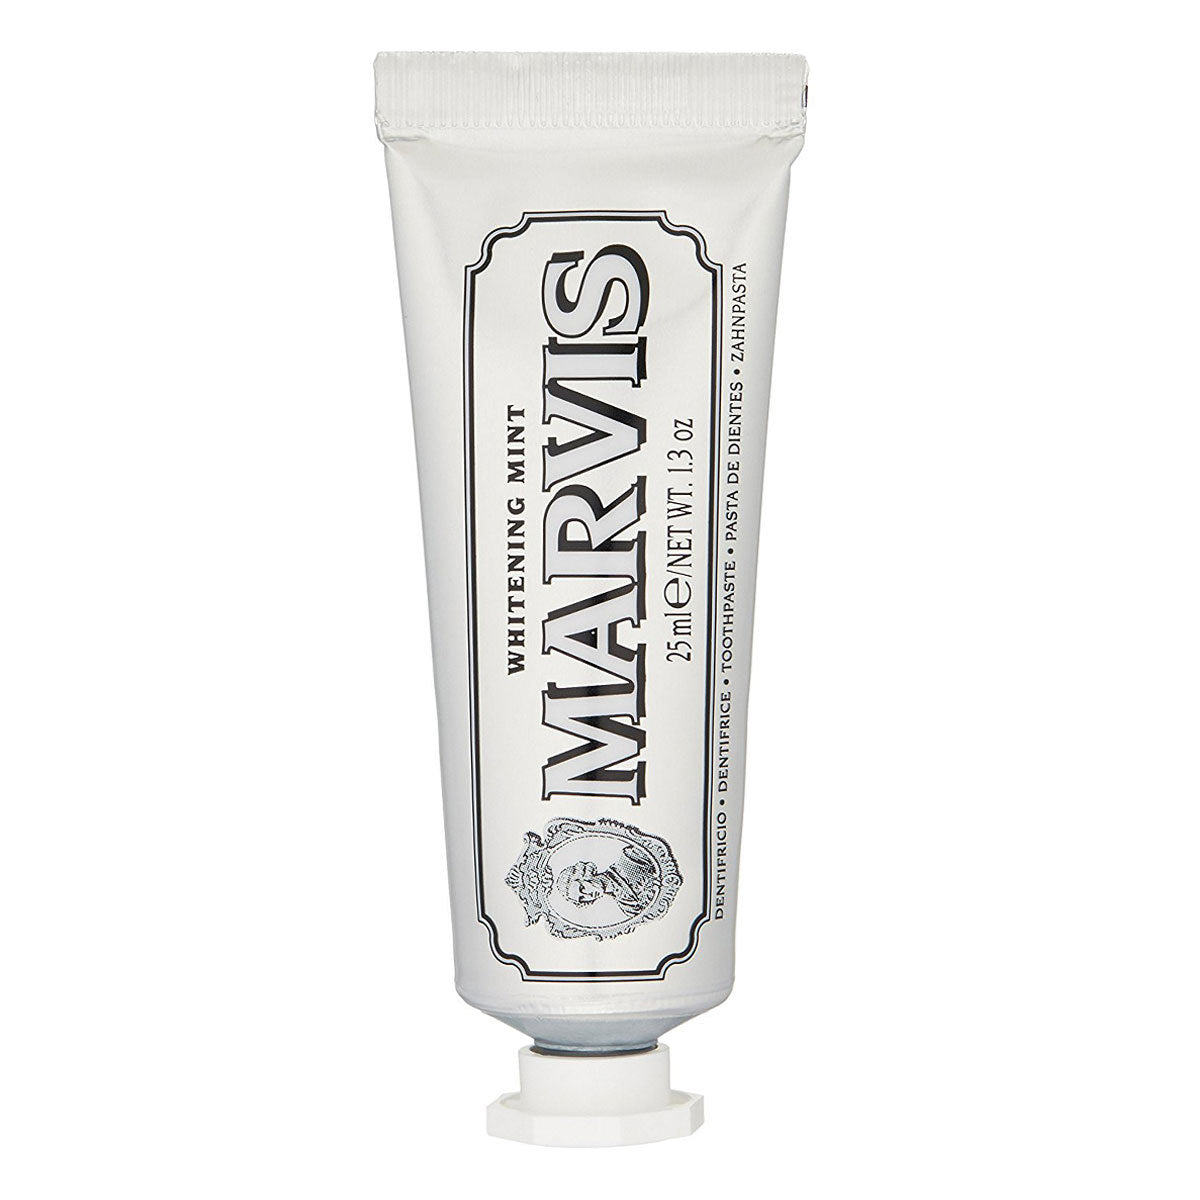 Primary image of Whitening Travel Size Toothpaste